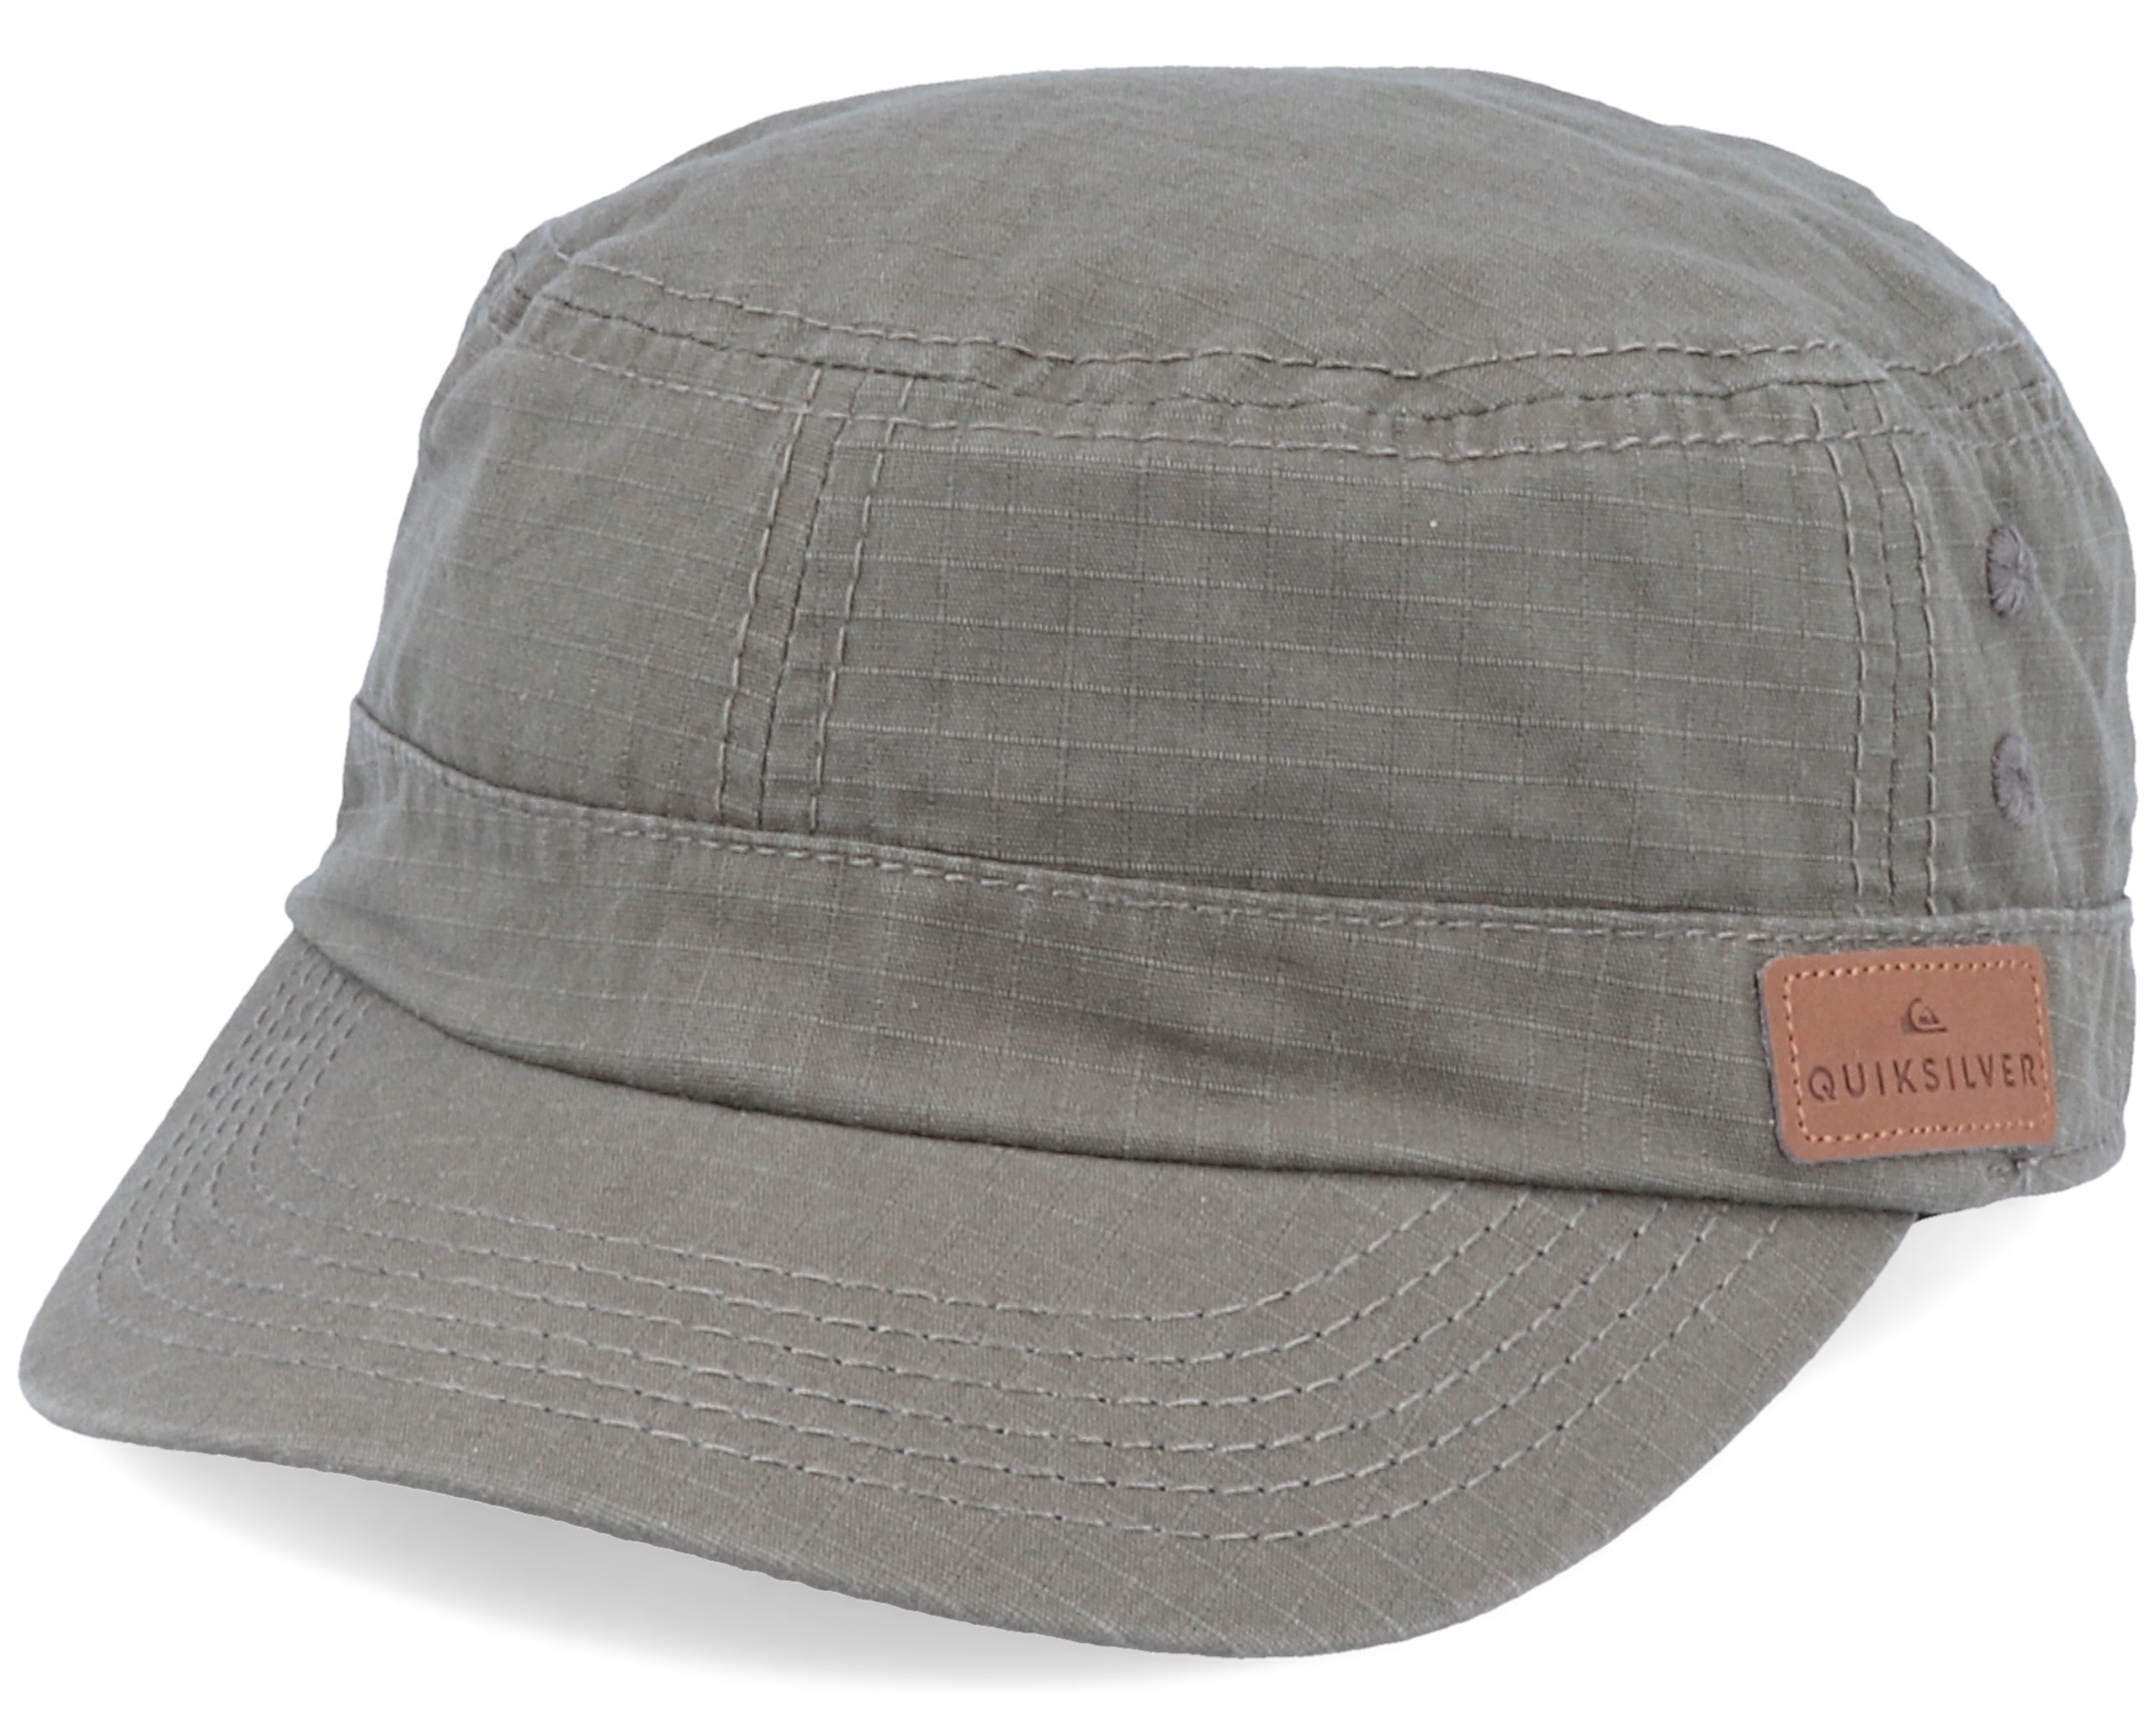 Army 2 Quiksilver Renegade Olive cap -